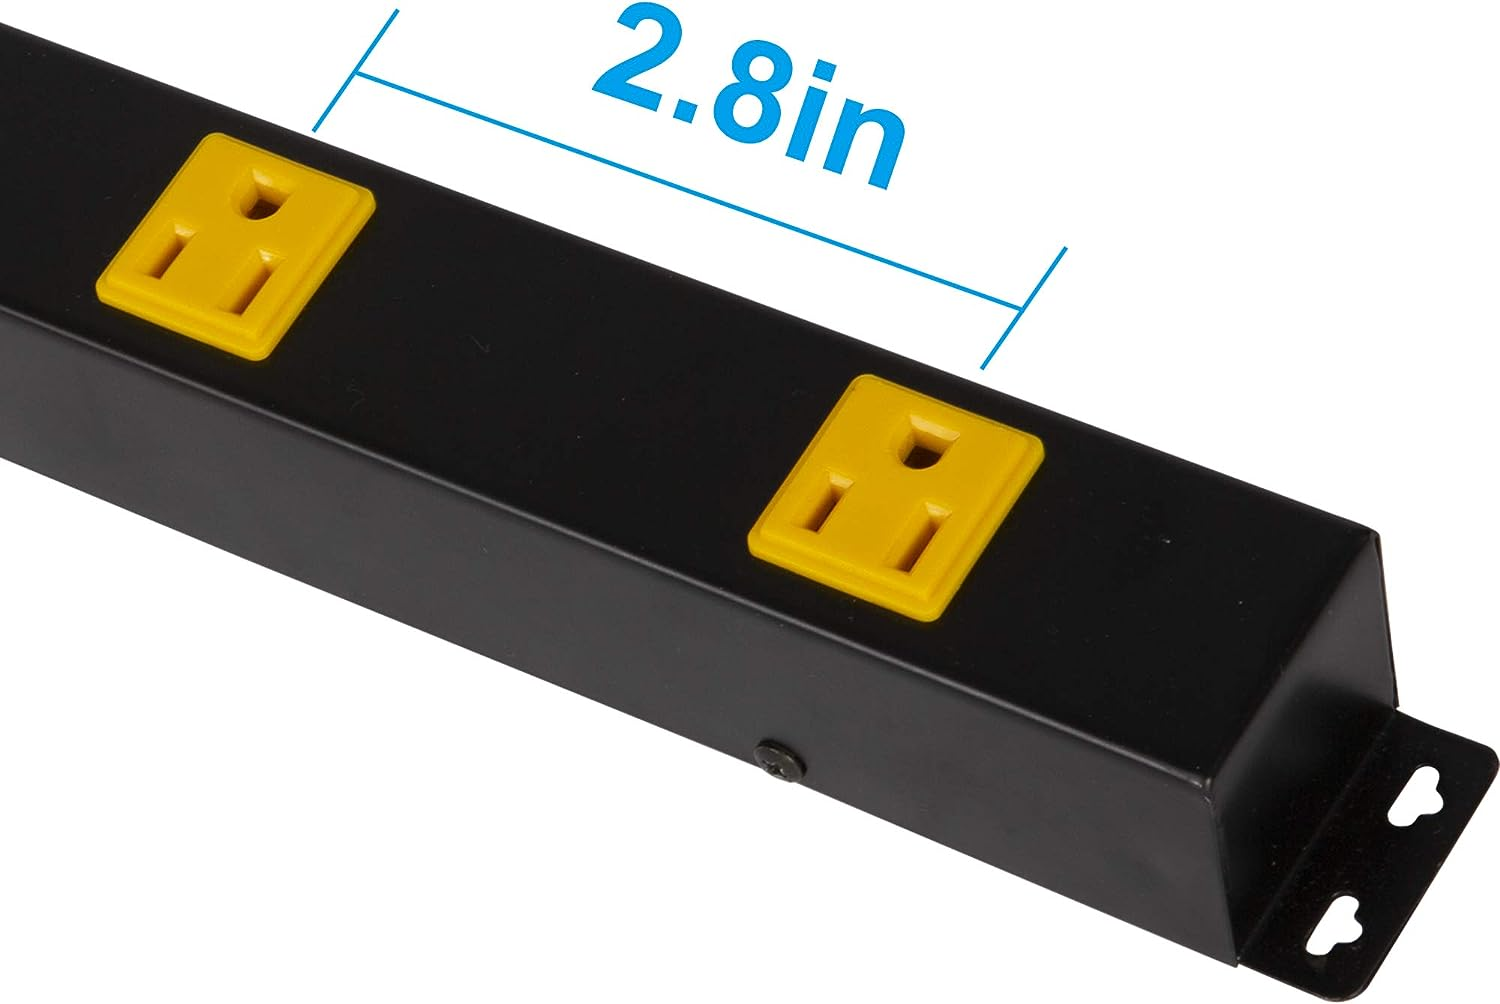 Surge Protector Power Strip with Outlets Ports 6-Foot Cord for Home, Office -Black (1, 10outlets)